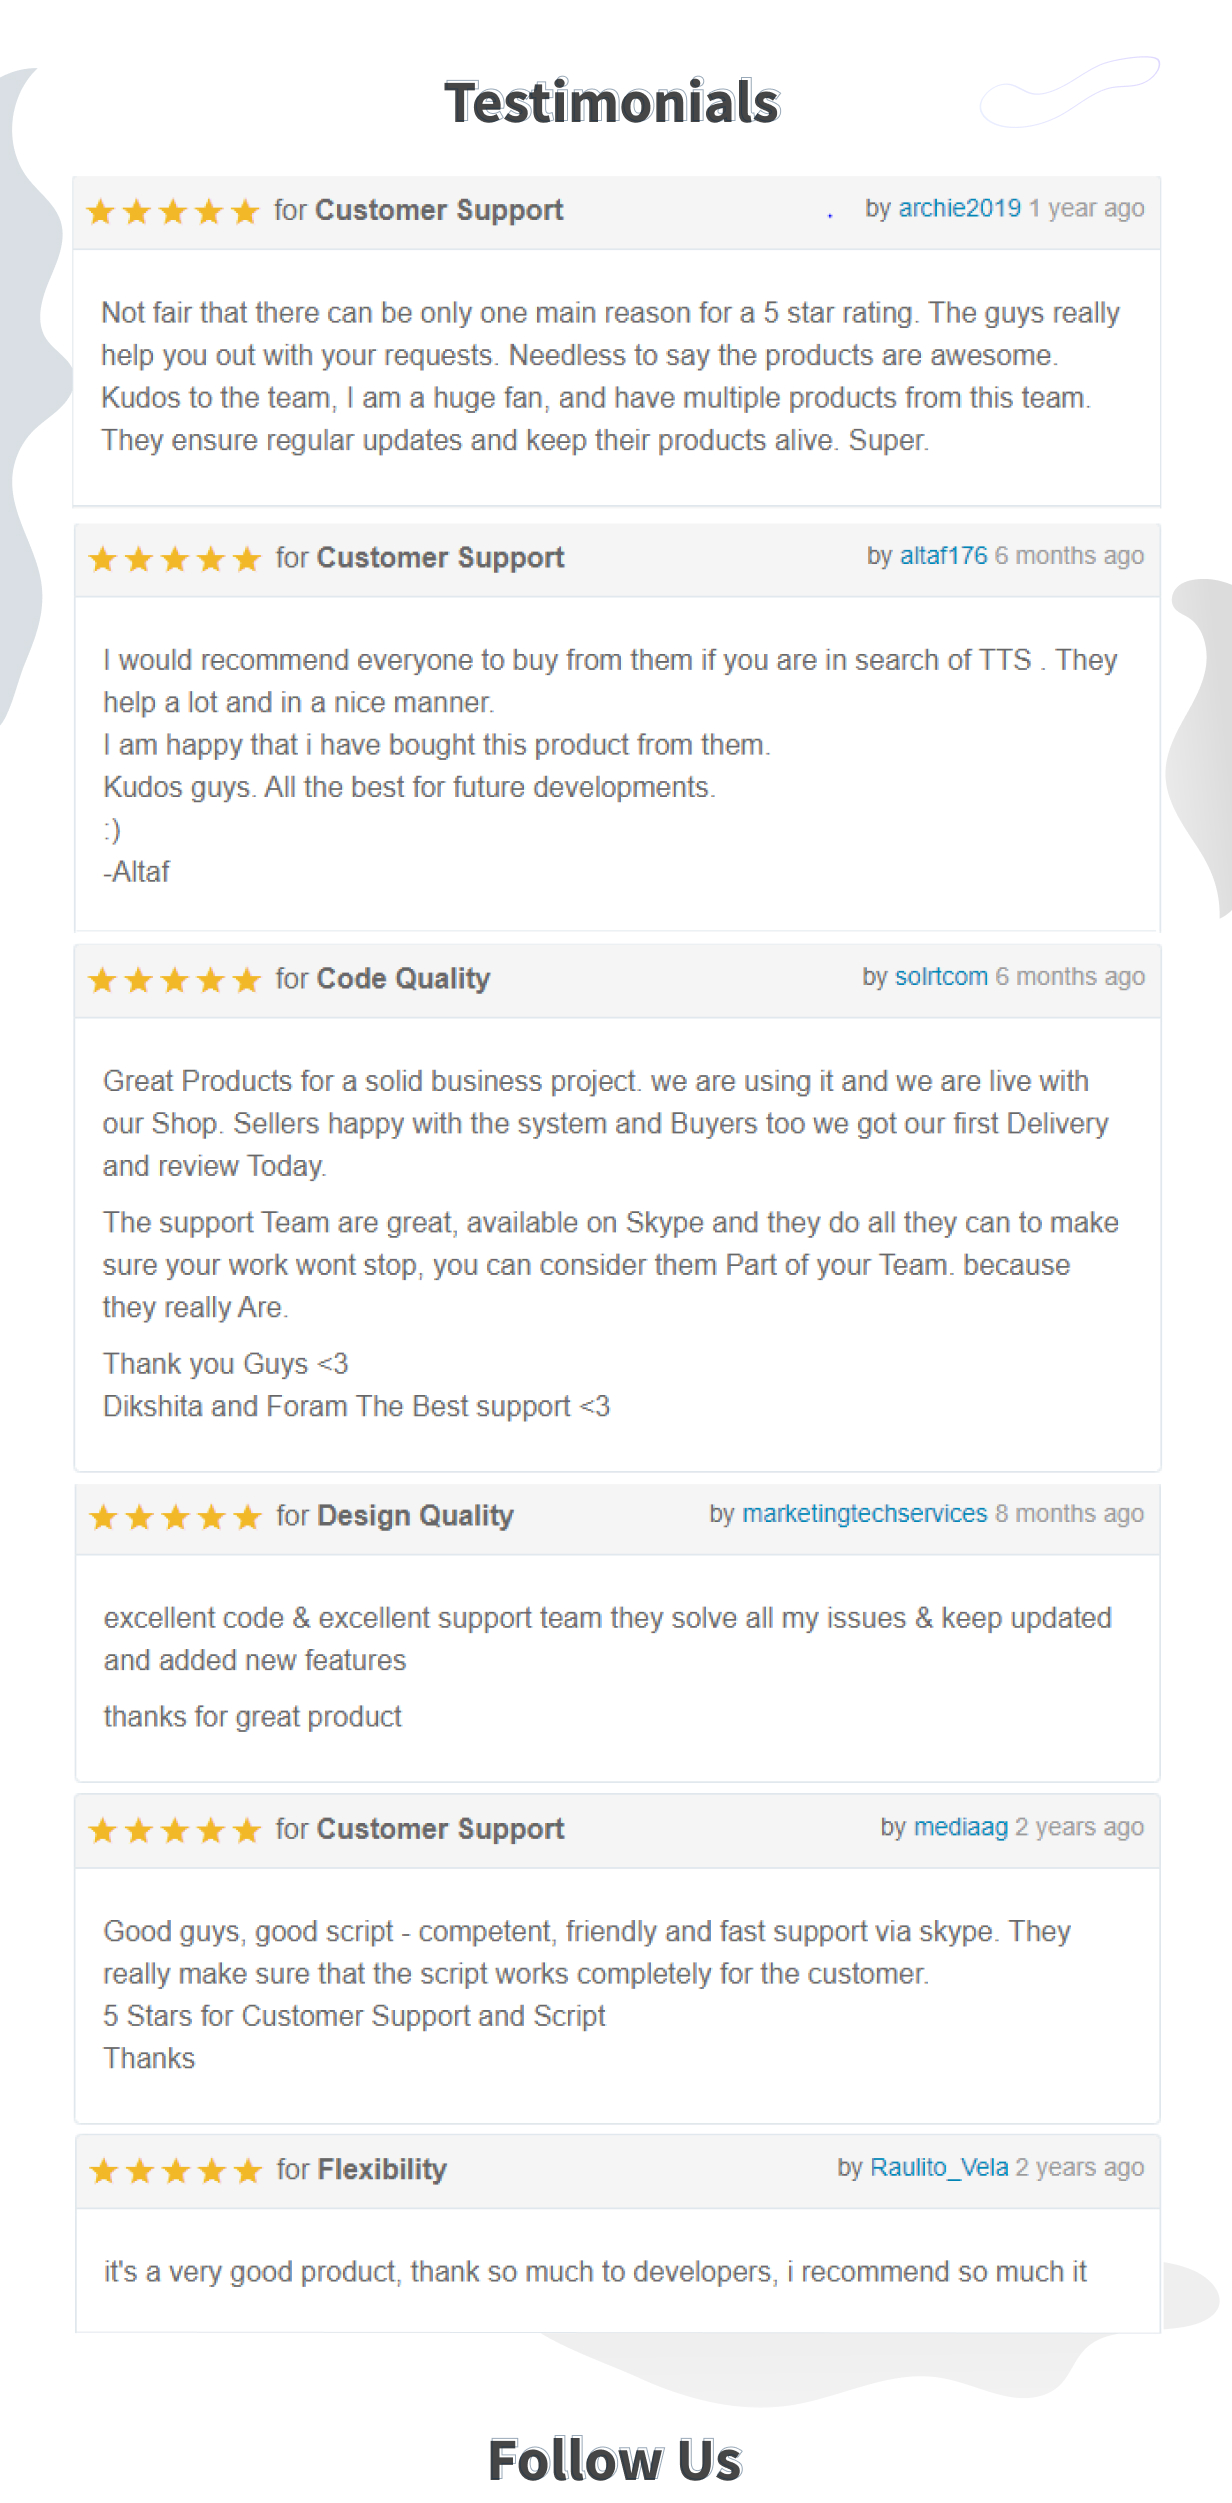 See what our customers say